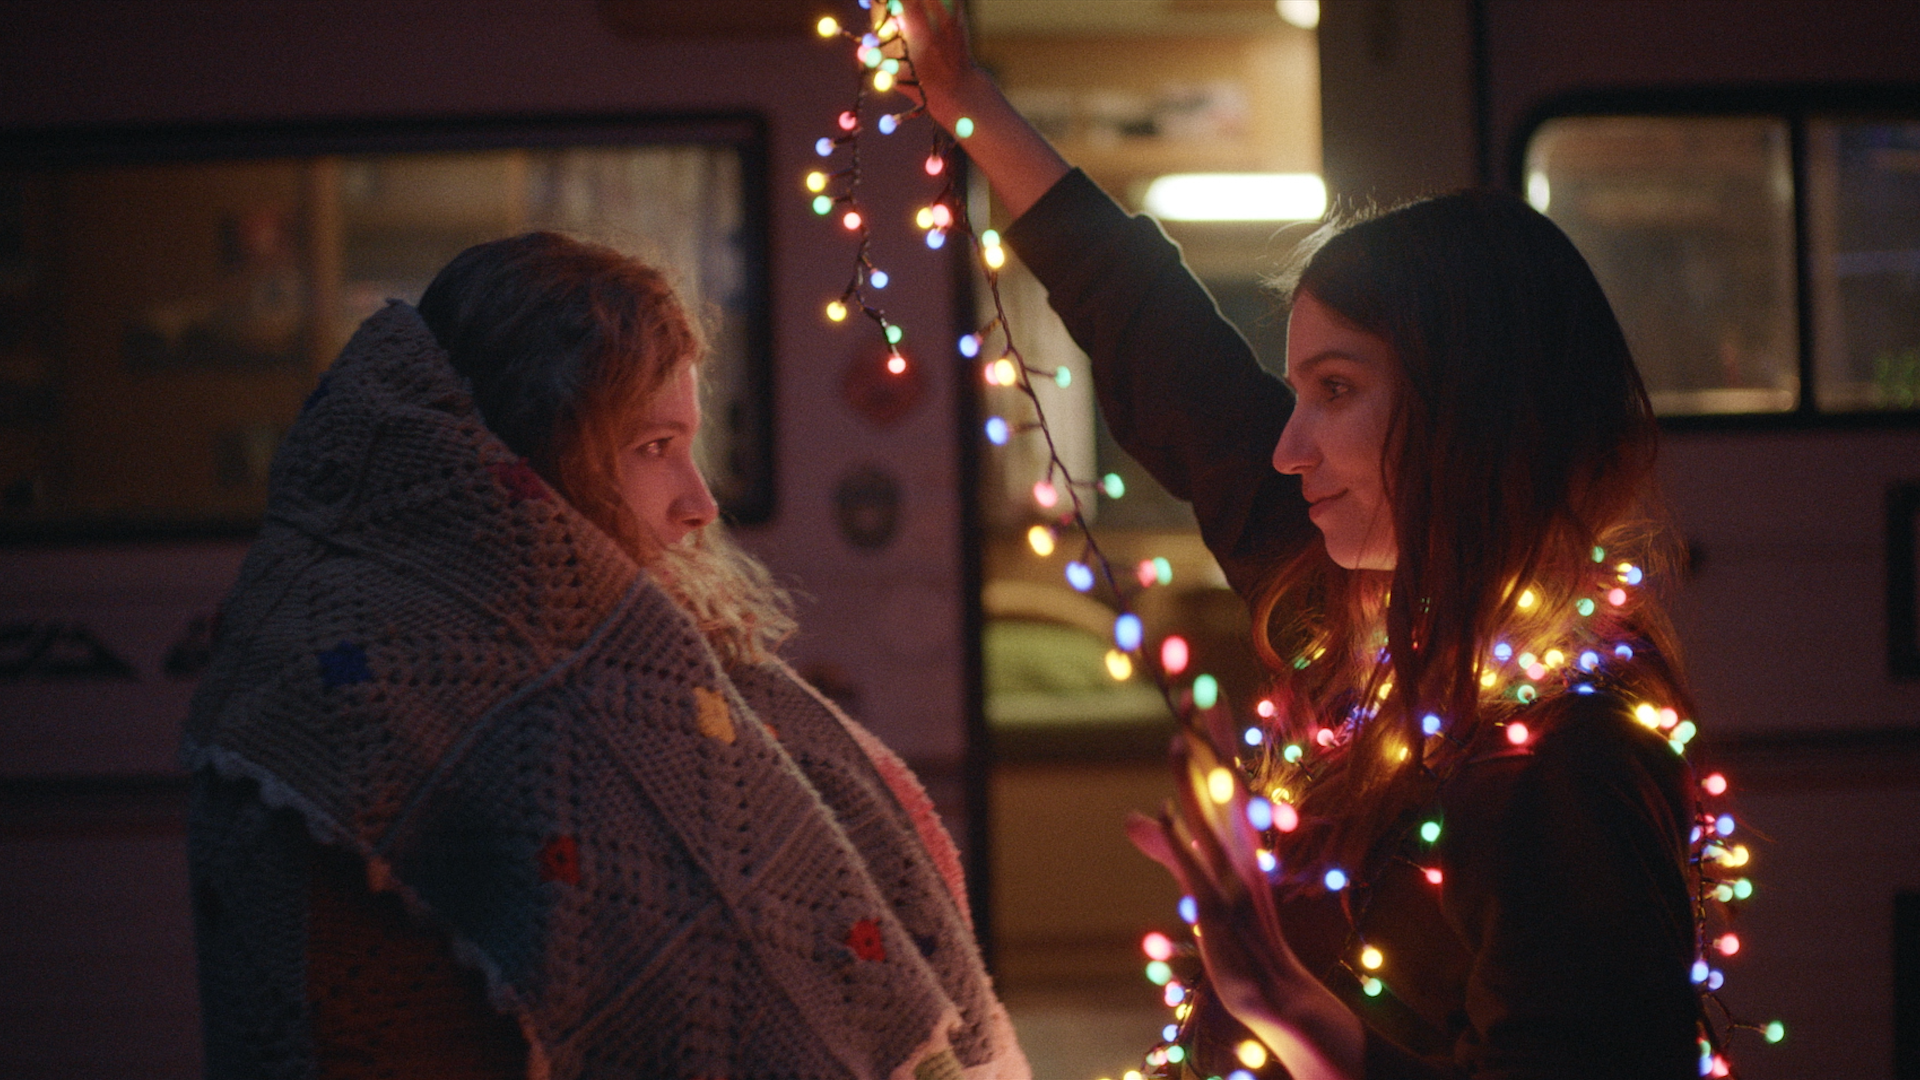 Two women smile at each other – one is wrapped in a blanker, the other a string of colourful fairy lights